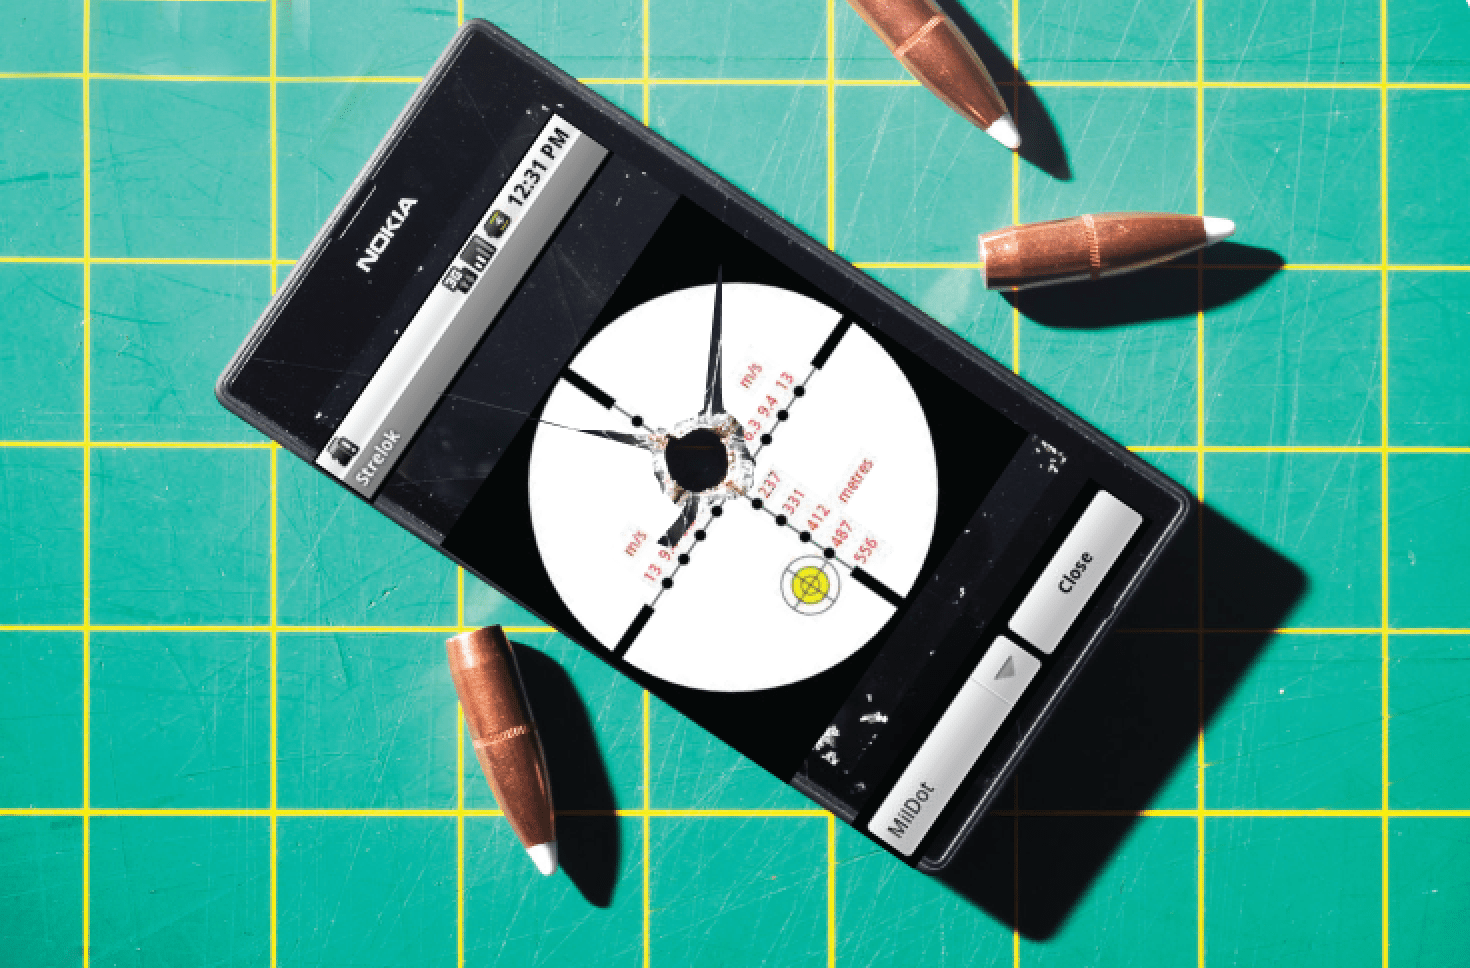 Ballistics Apps: Dope Your Shot on the Cheap